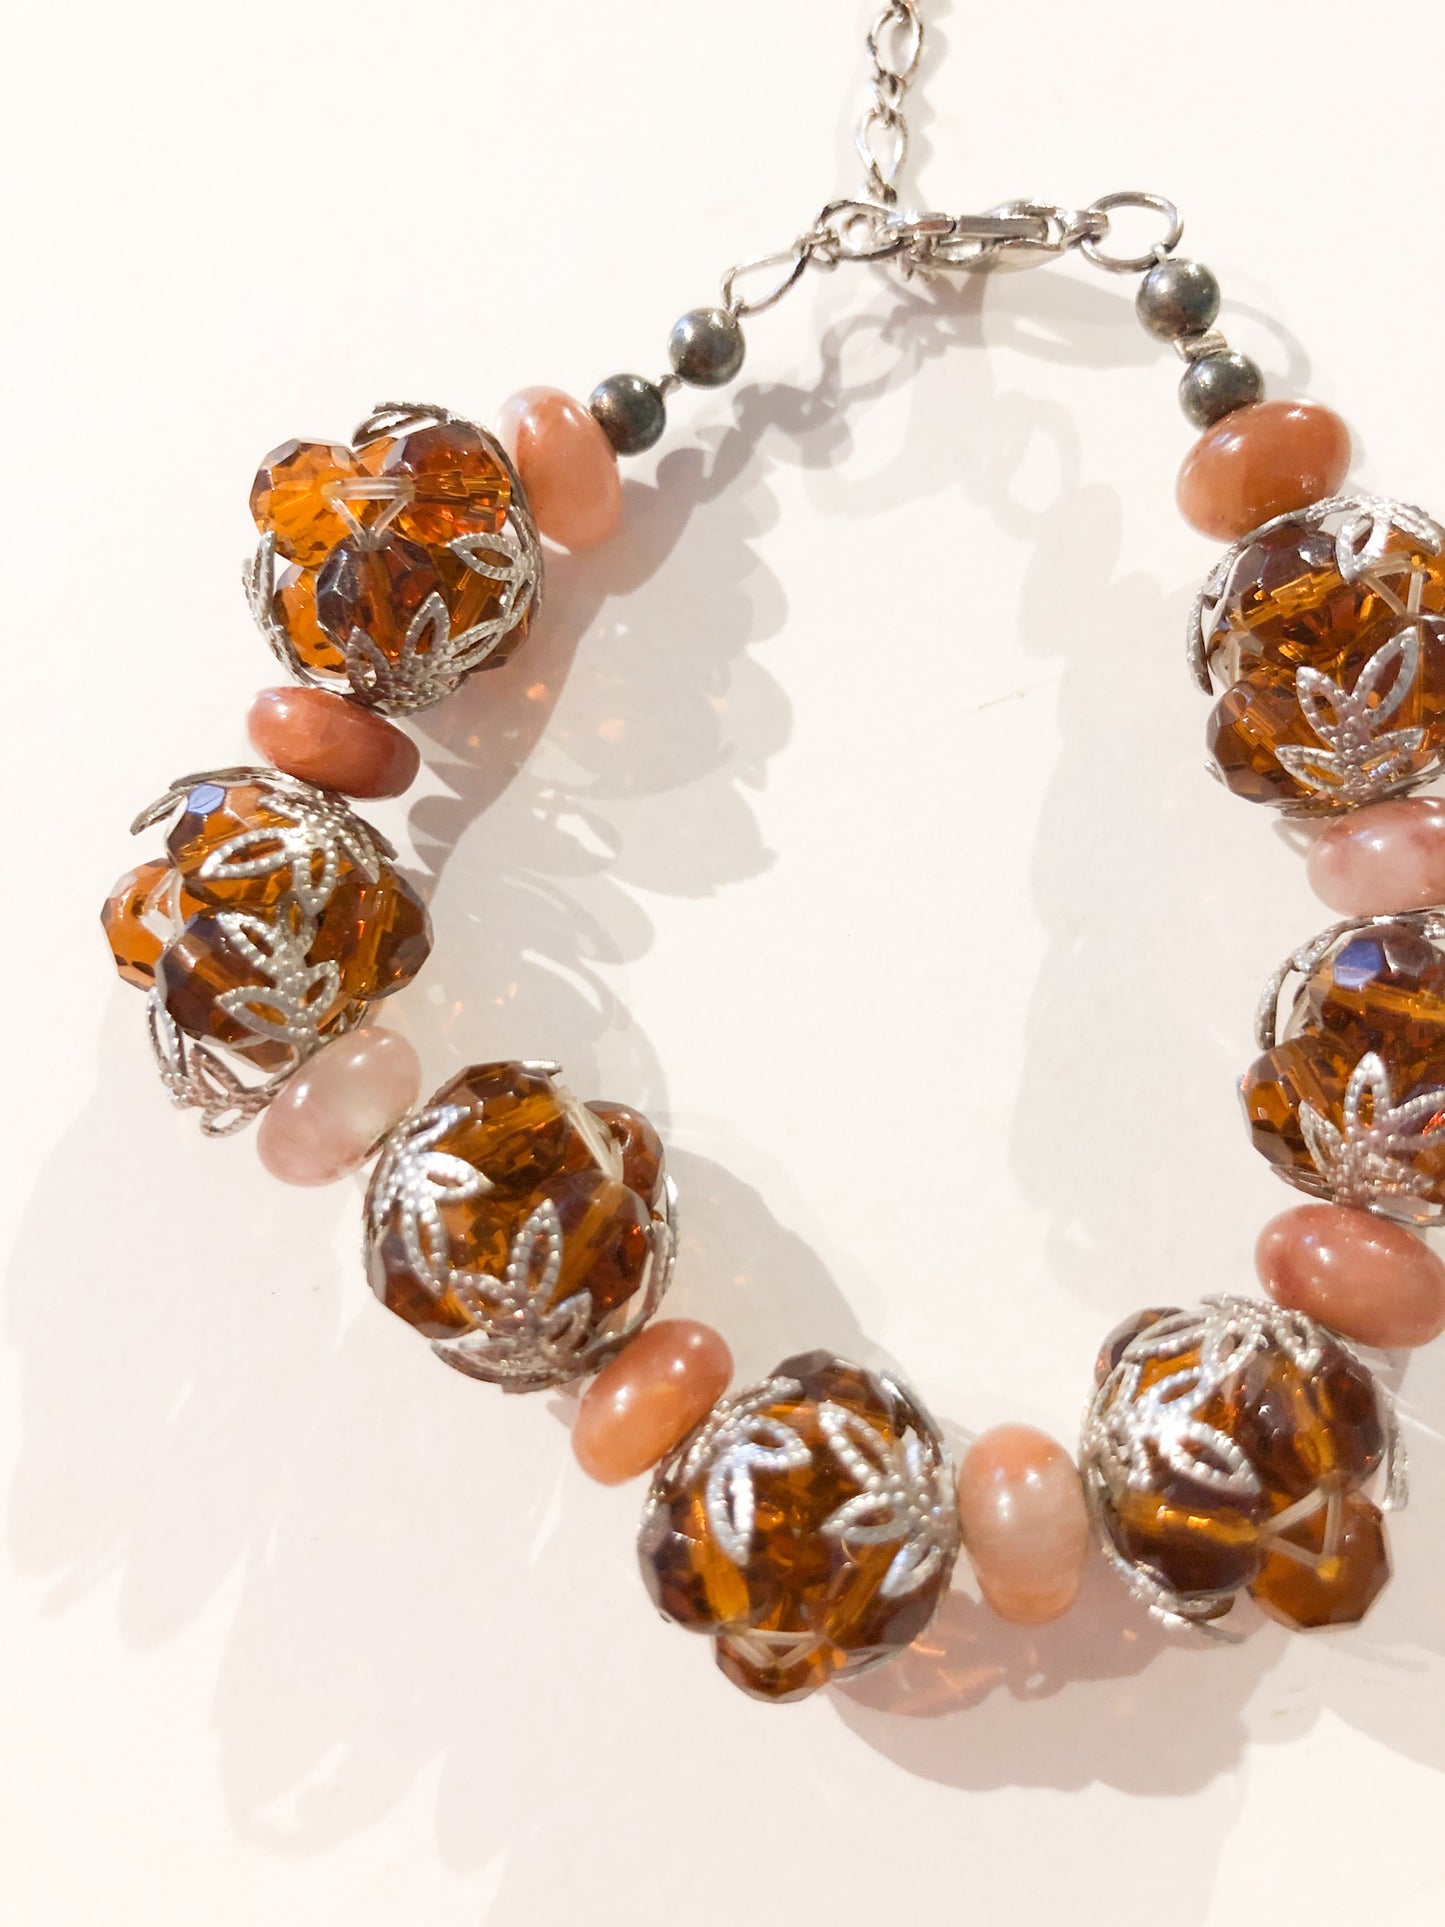 Amber Bead Cluster Bracelet with Silver Leaf - Le Prix Fashion & Consulting